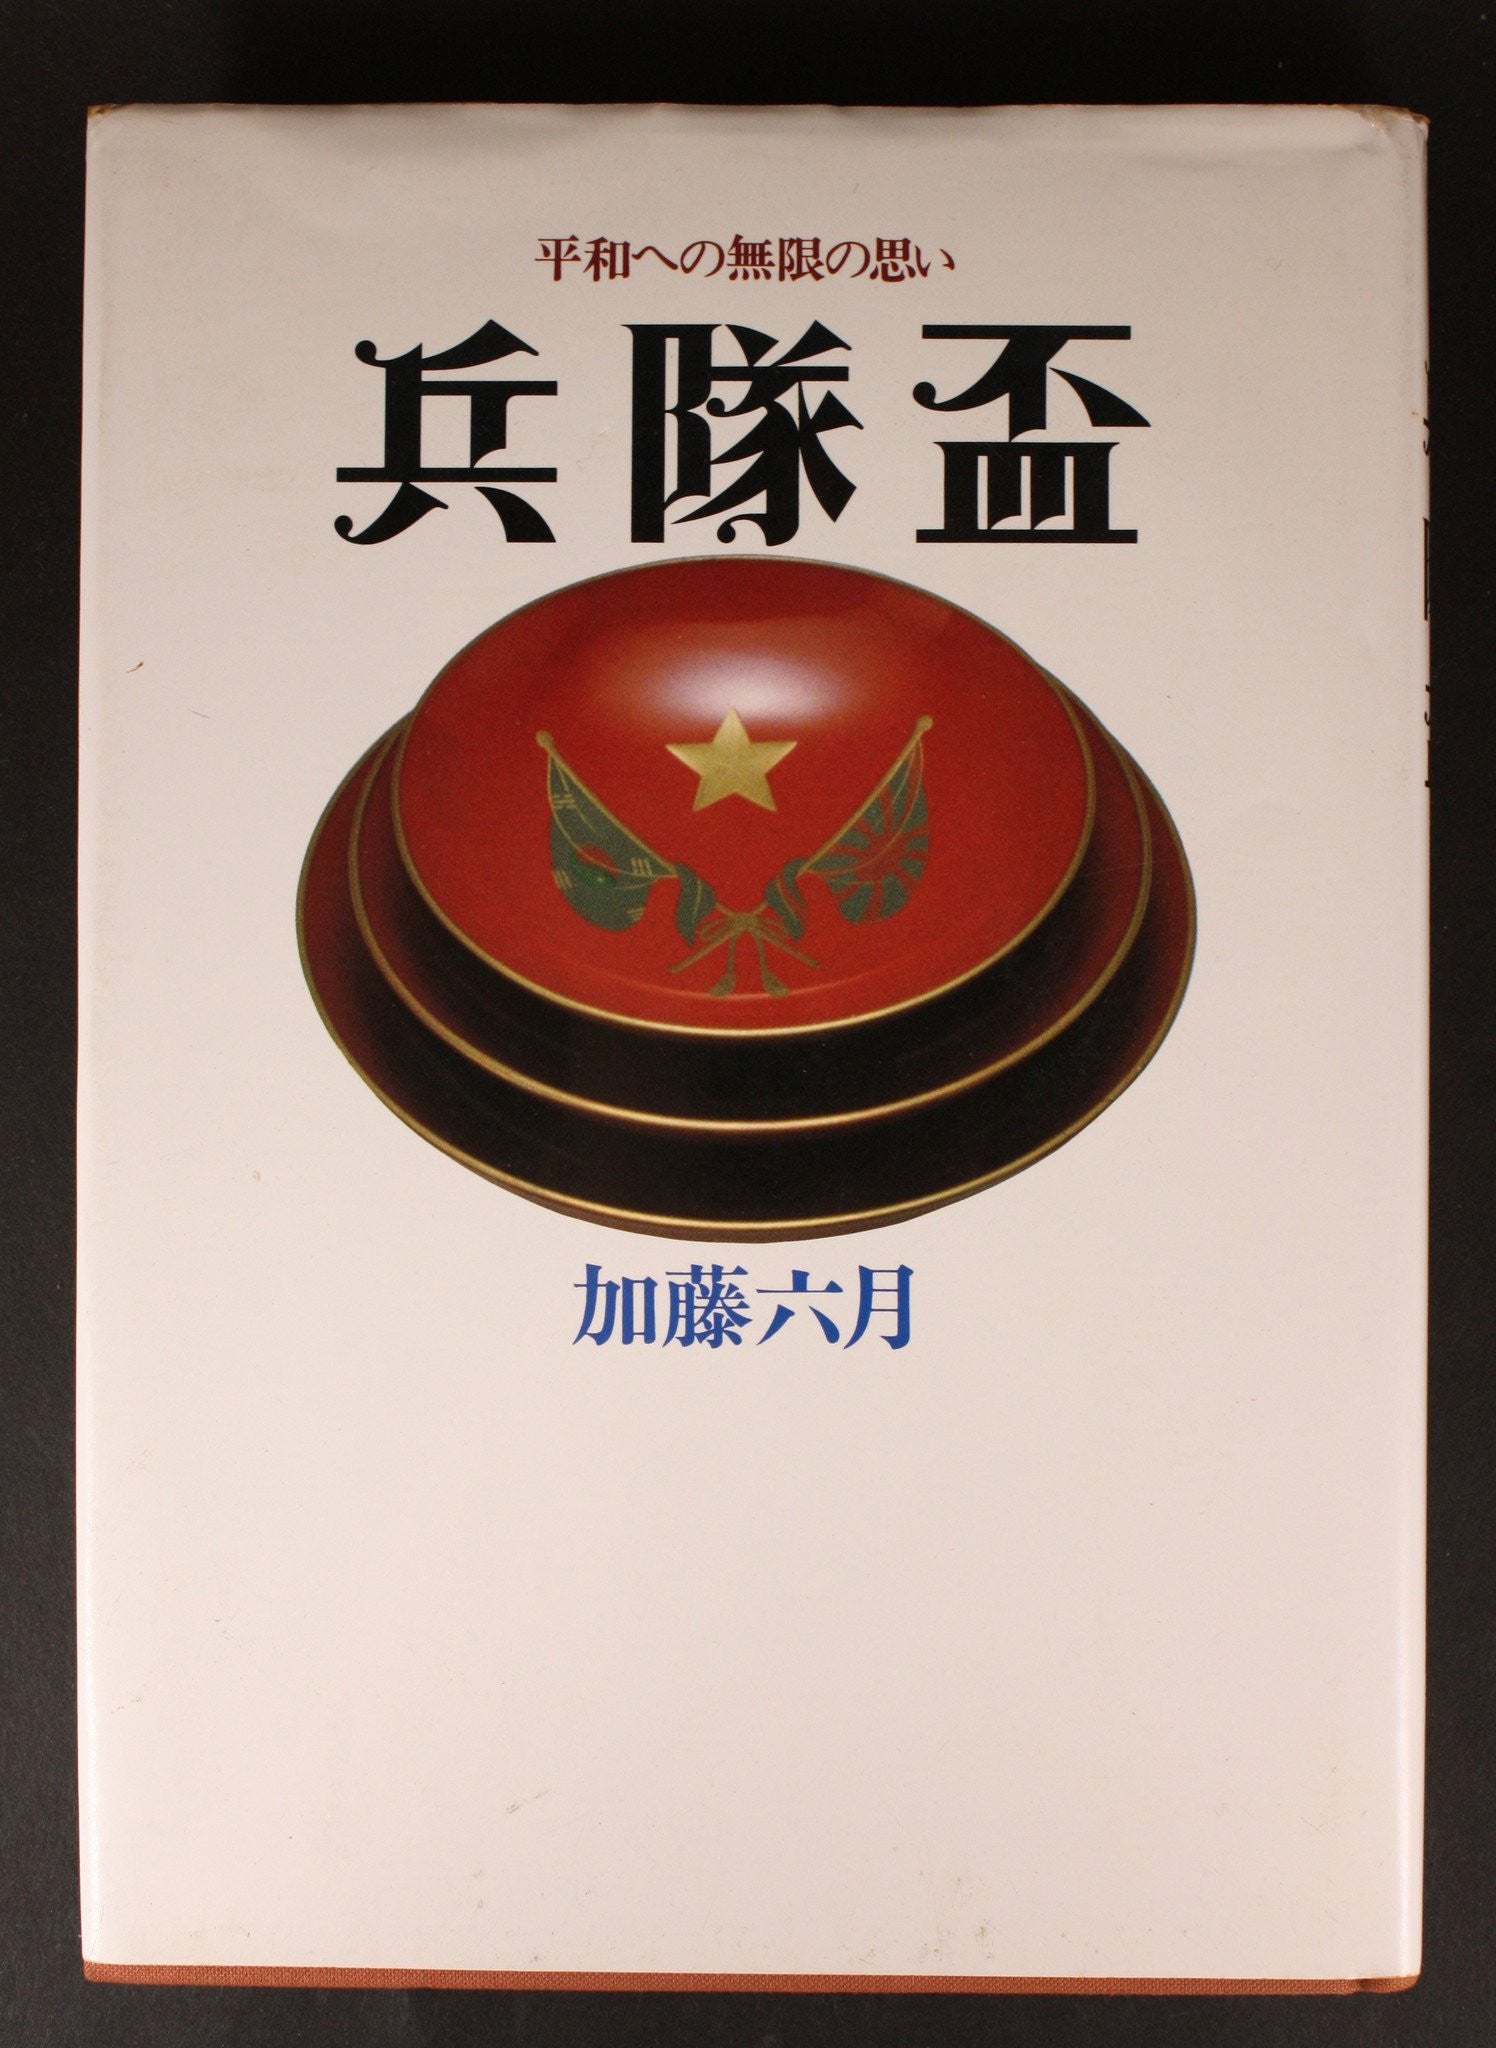 Learning about military sake cups: Books